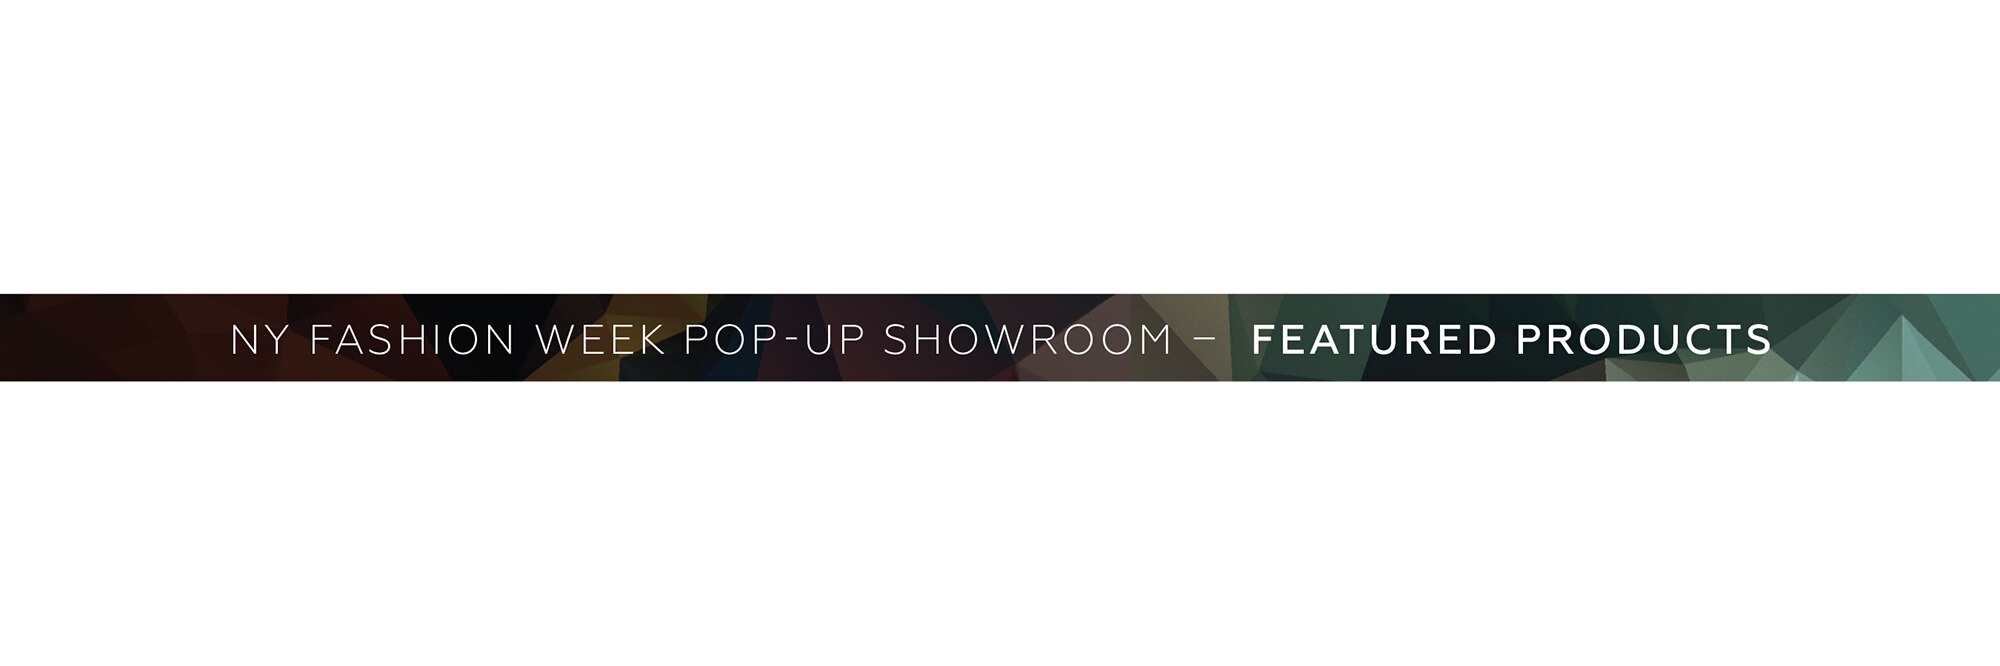 NY Fashion Week Pop-Up Showroom - Featured Products